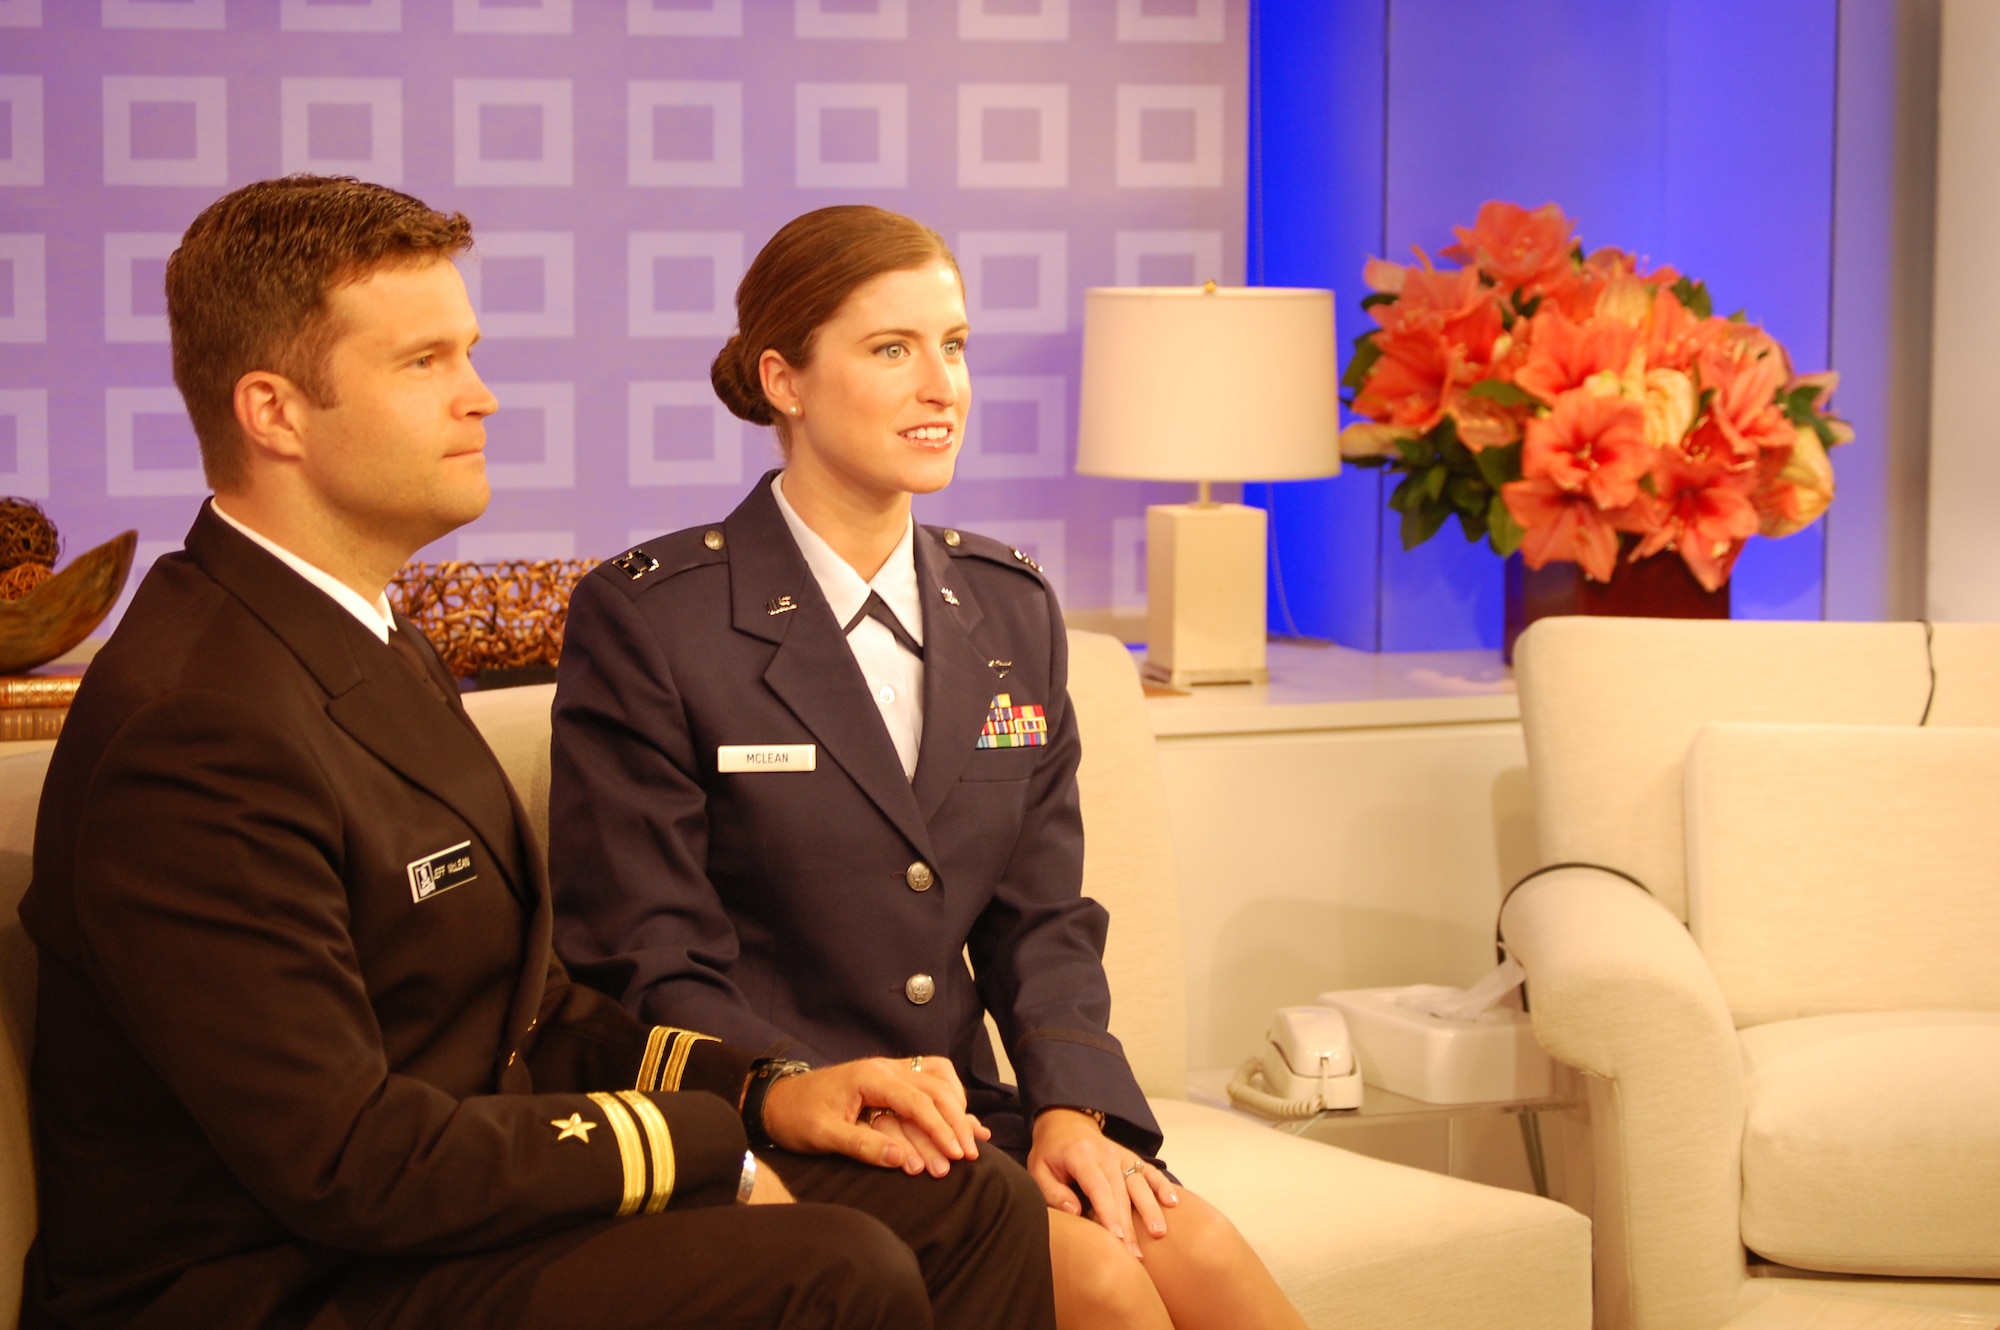 The couple makes a cameo on NBC's Today prior to going into a commercial break. Navy Lt. Jeff McLean, and his wife, Air Force Capt. Christine McLean were interviewed live on Sunday, Aug 1. (USAF photo by Maj. Shannon Mann, 916ARW/PA)